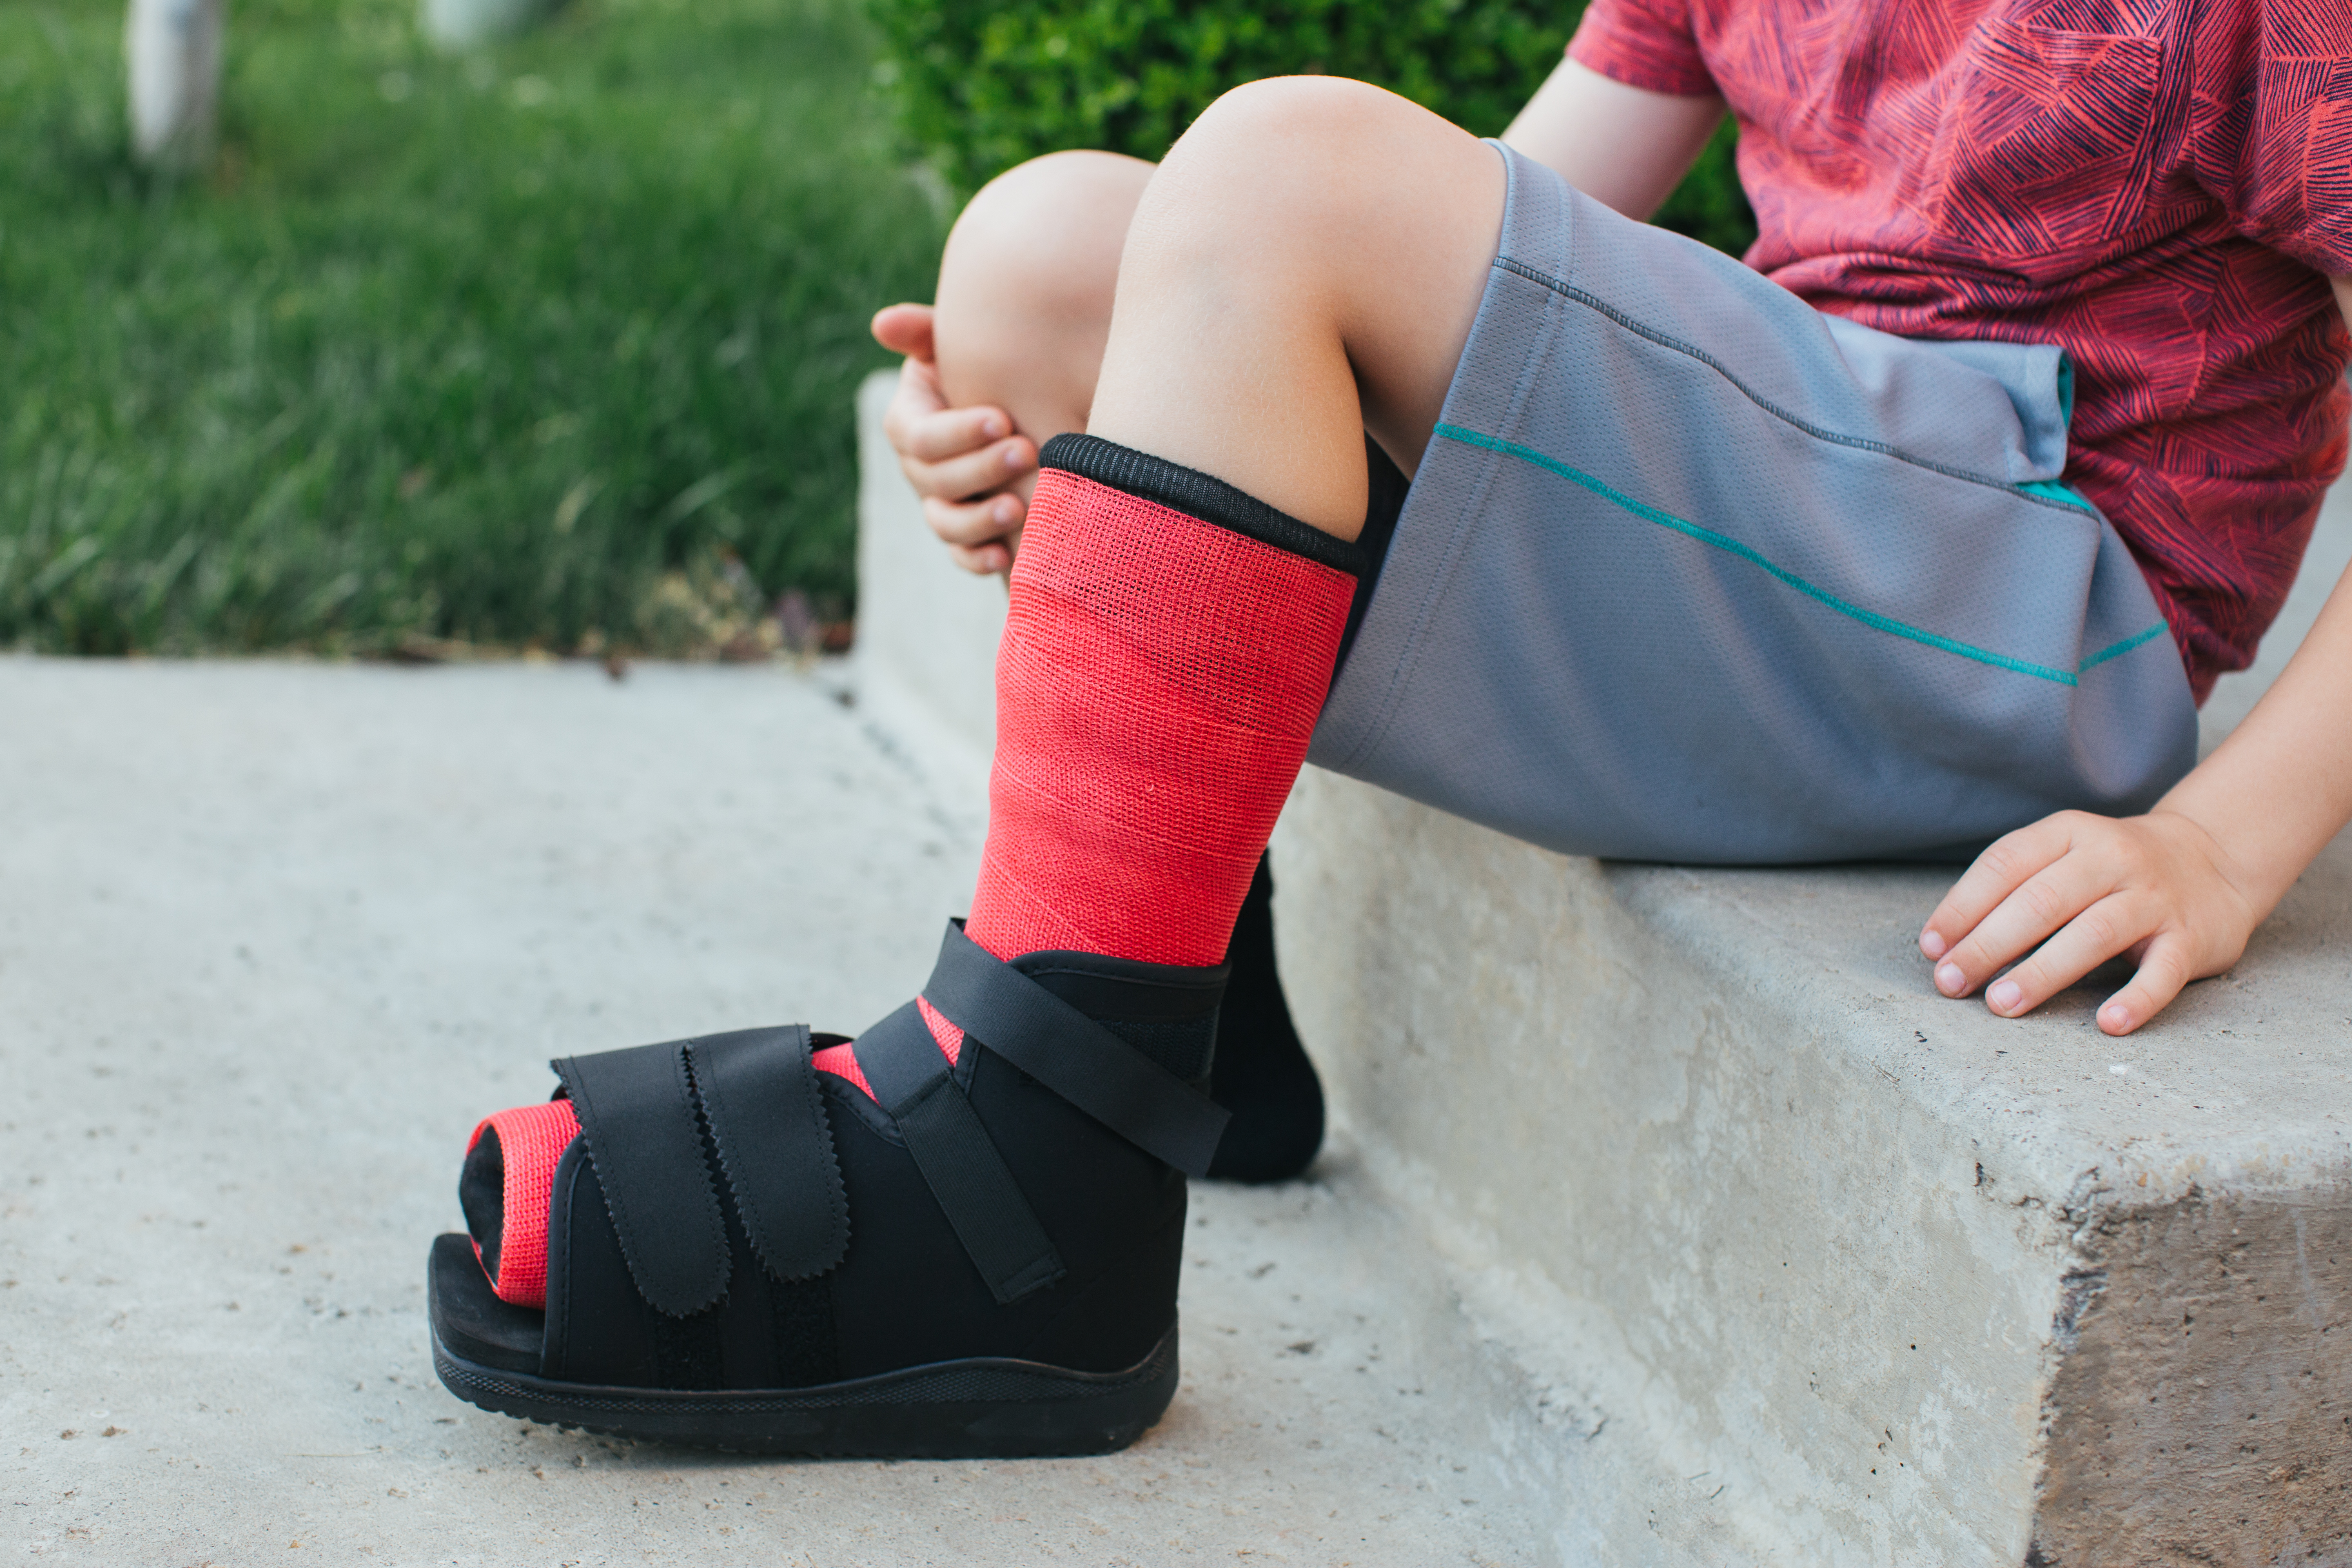 A boy with fractured ankle in cast. | Source: Getty Images